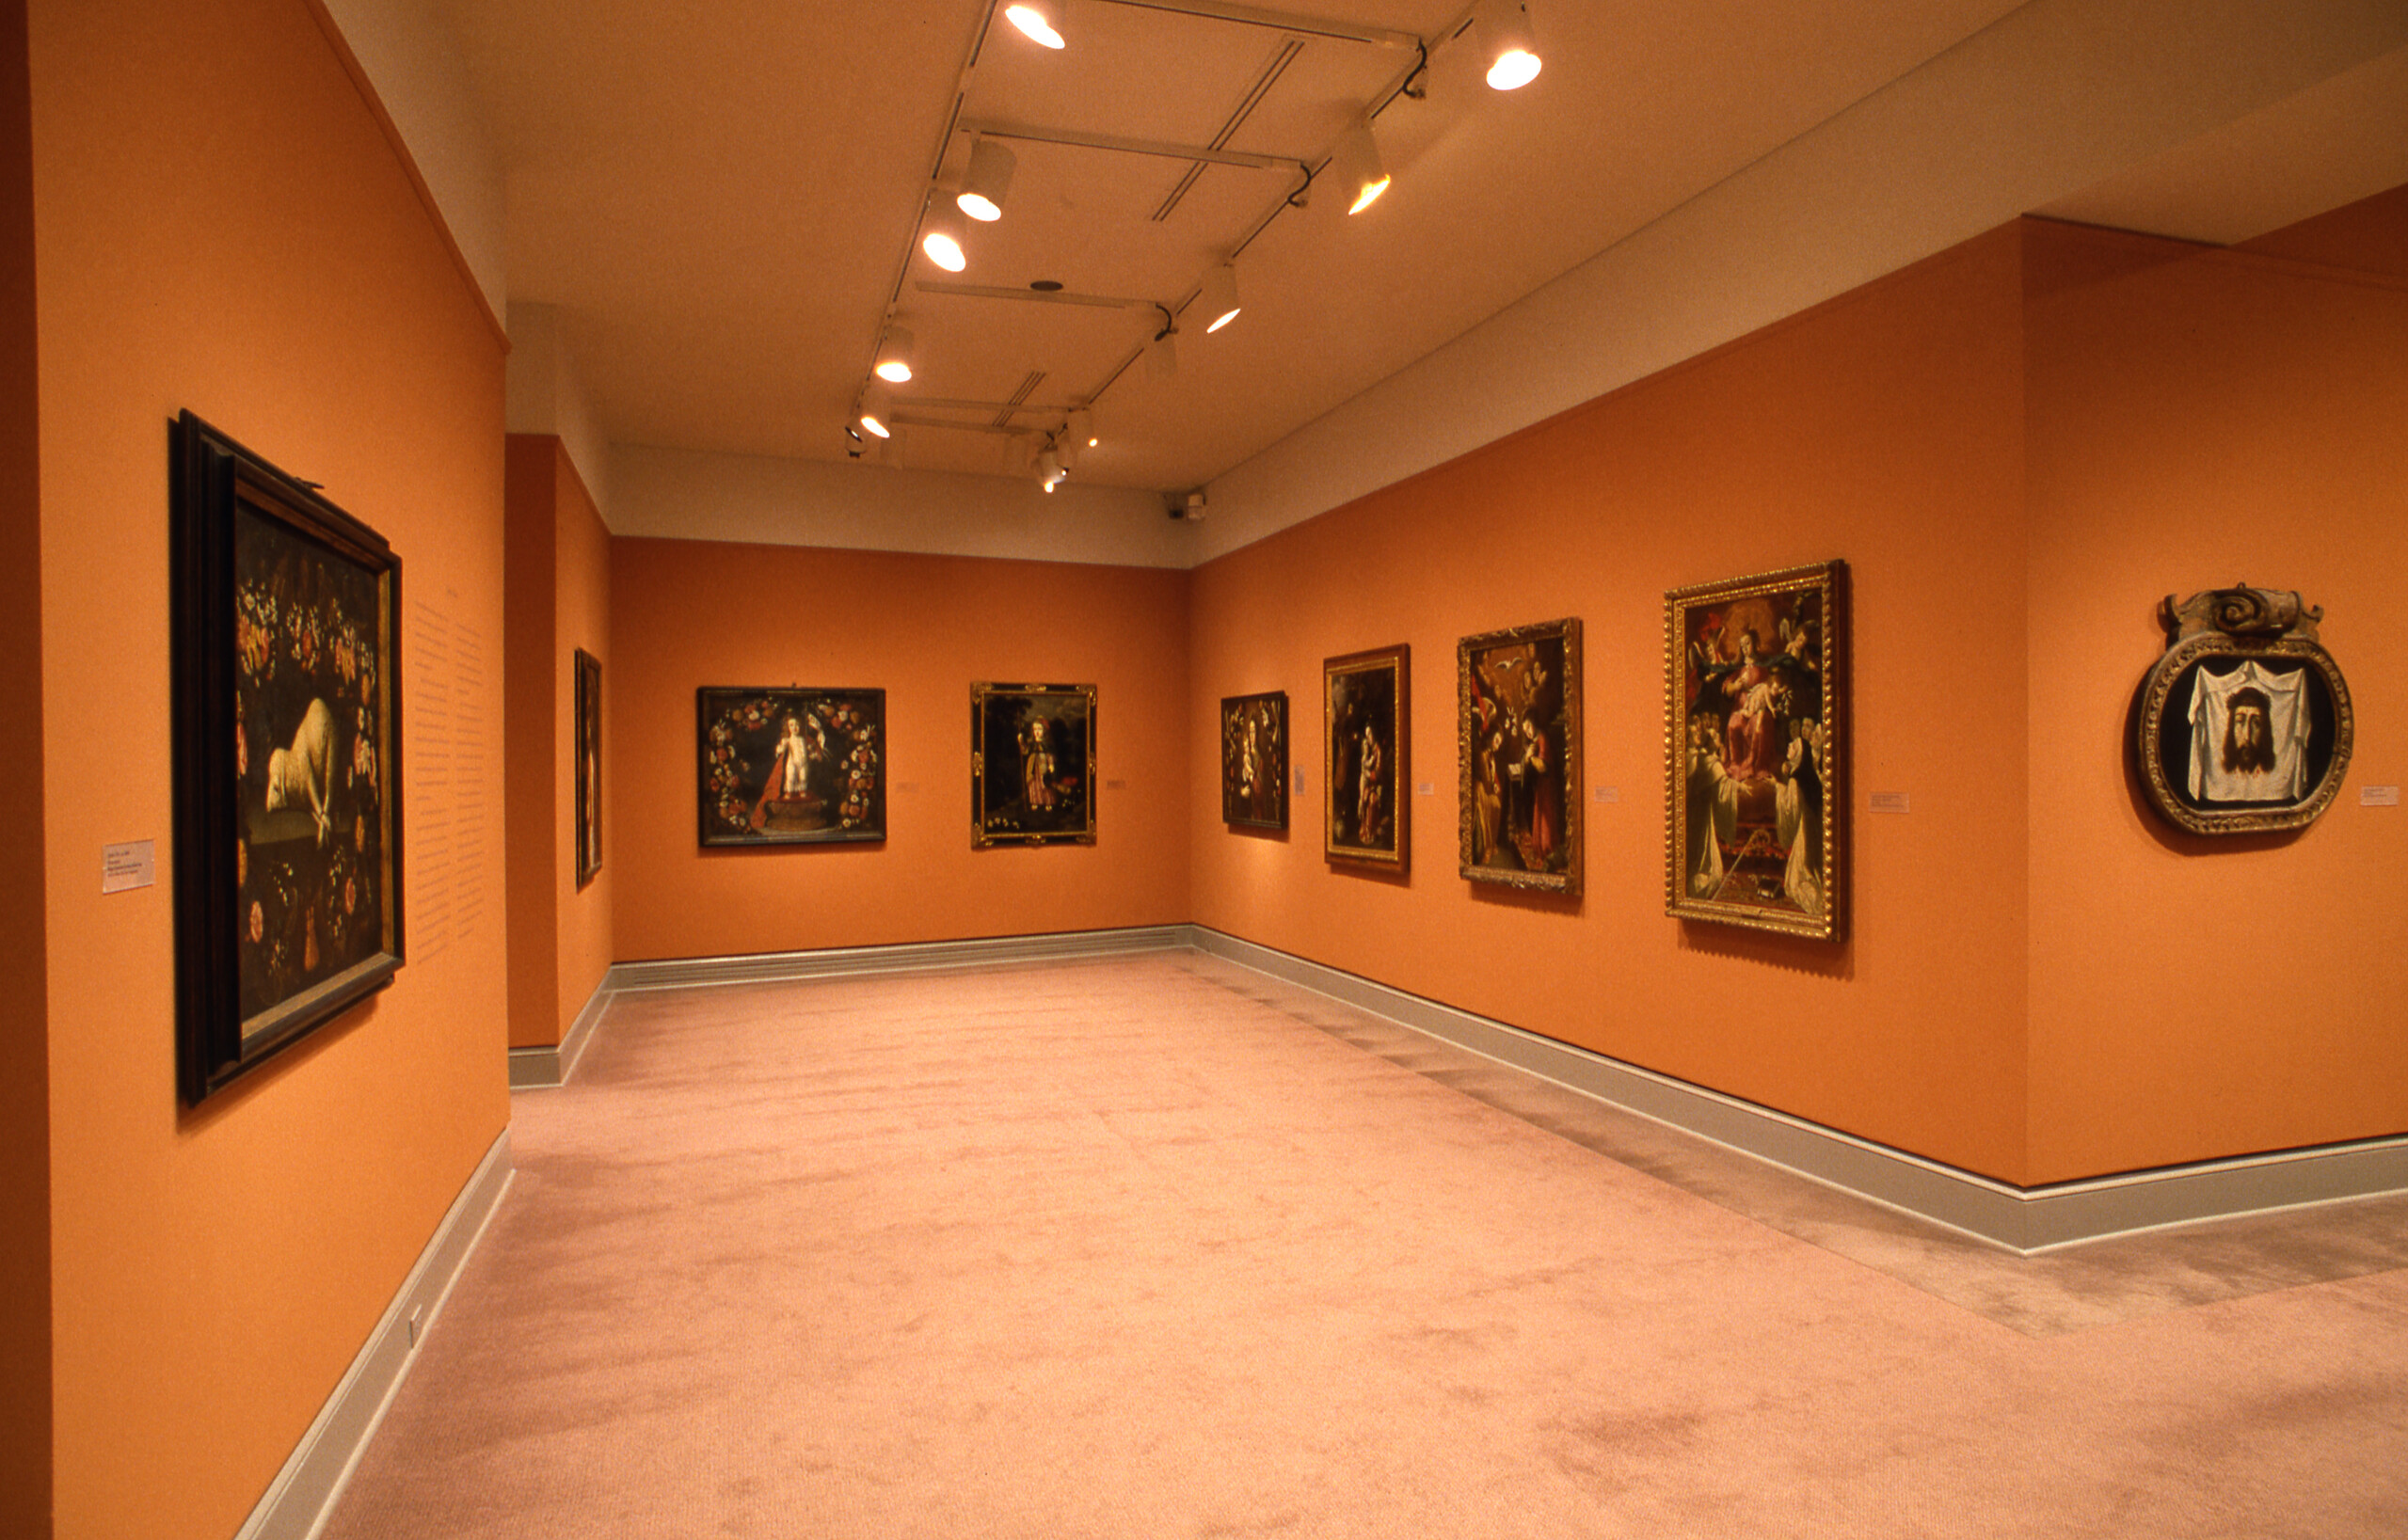 View of a gallery space with orange walls. Several artworks featuring Christian themes in golden frames are hanging on the wall.